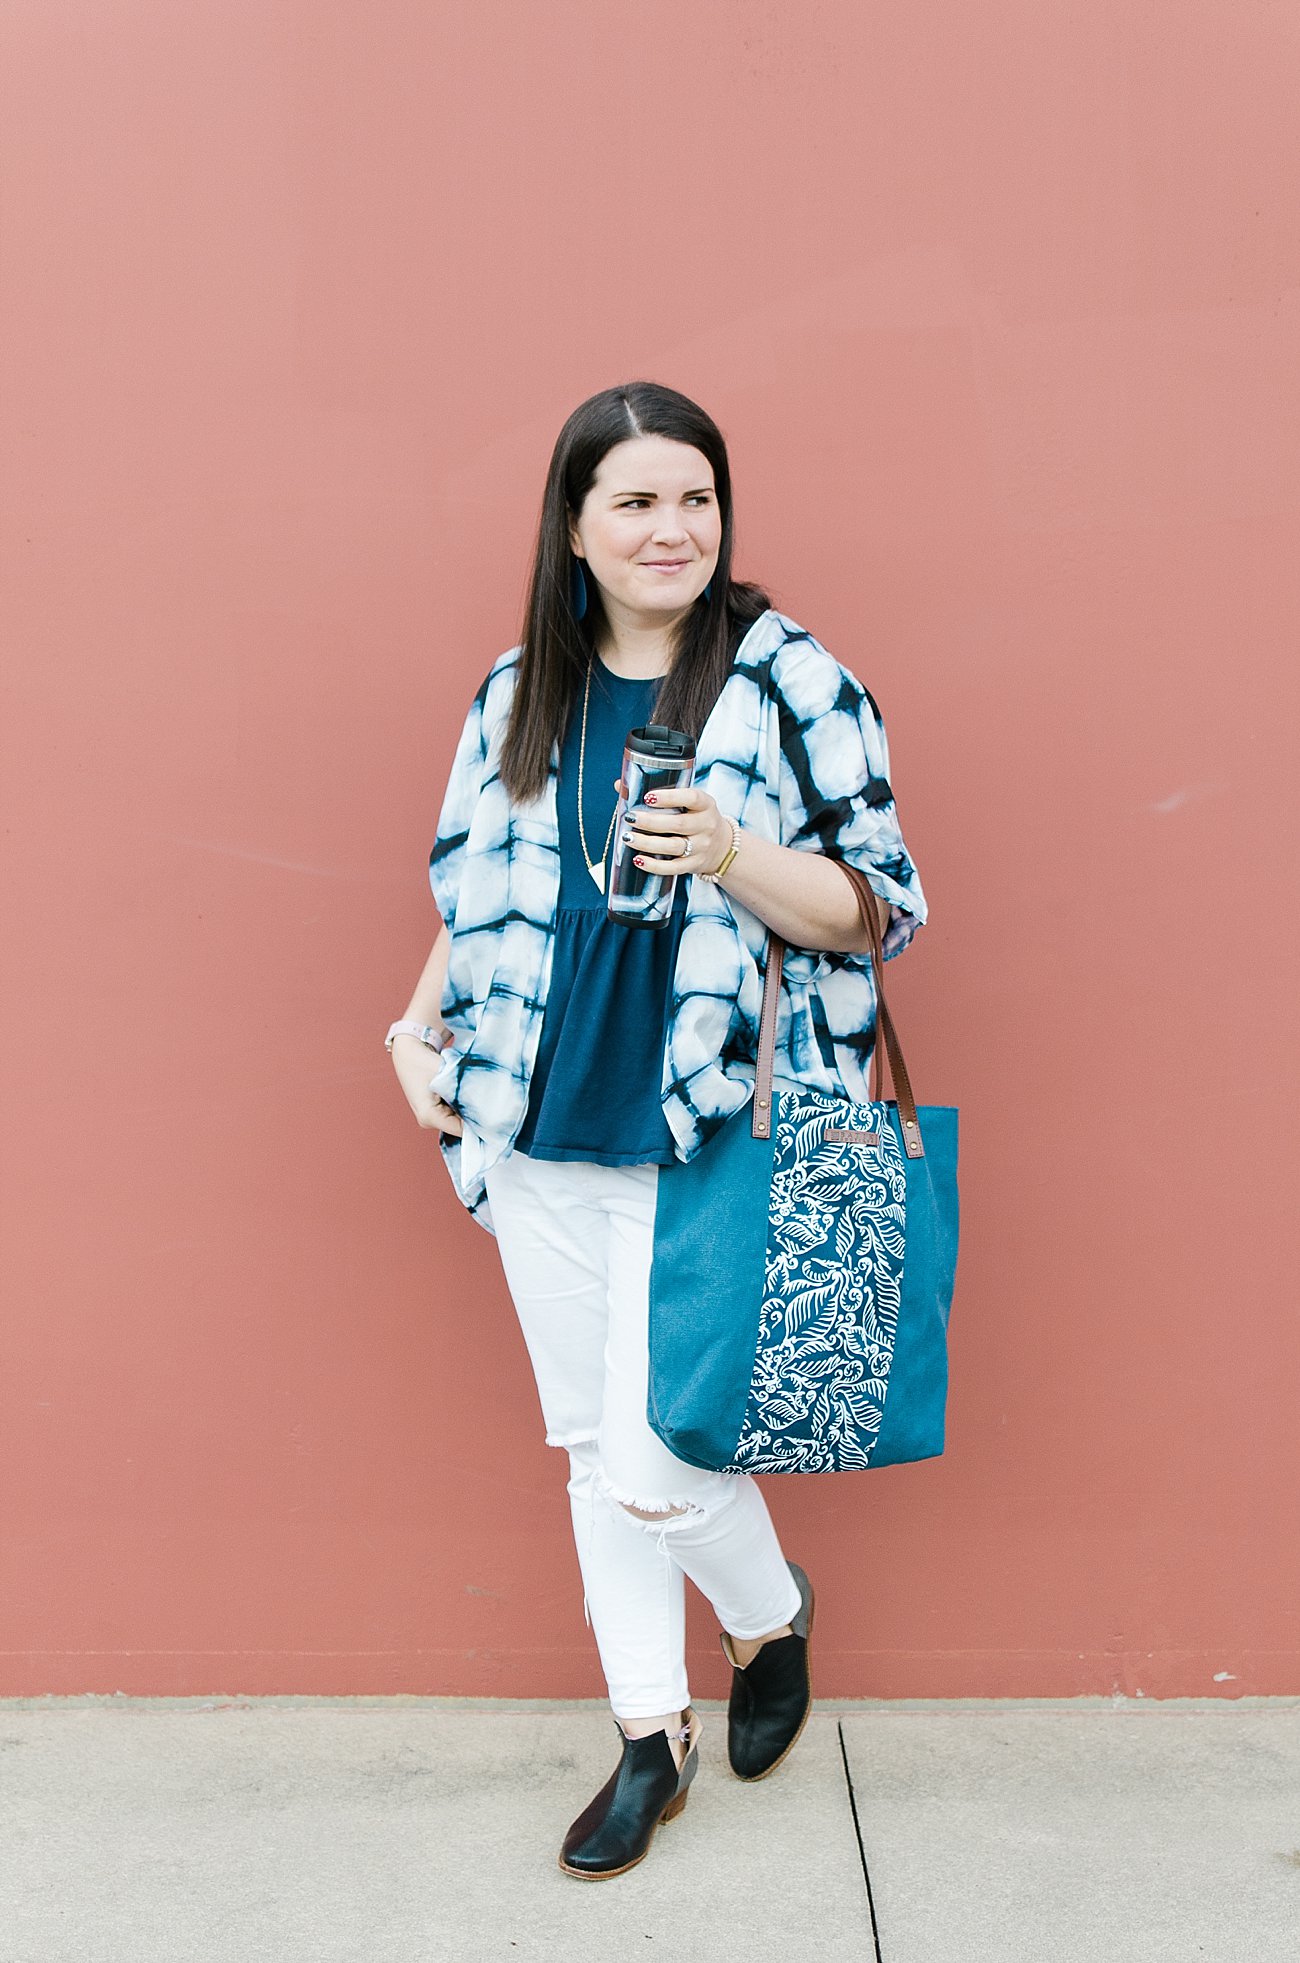 Batik Boutique - Ethical Fashion and Ethical Gift Ideas - Ethical Fashion Blogger - Disrupting the Cycle of Poverty with Ethical Fashion Brand The Batik Boutique by North Carolina ethical fashion blogger Still Being Molly